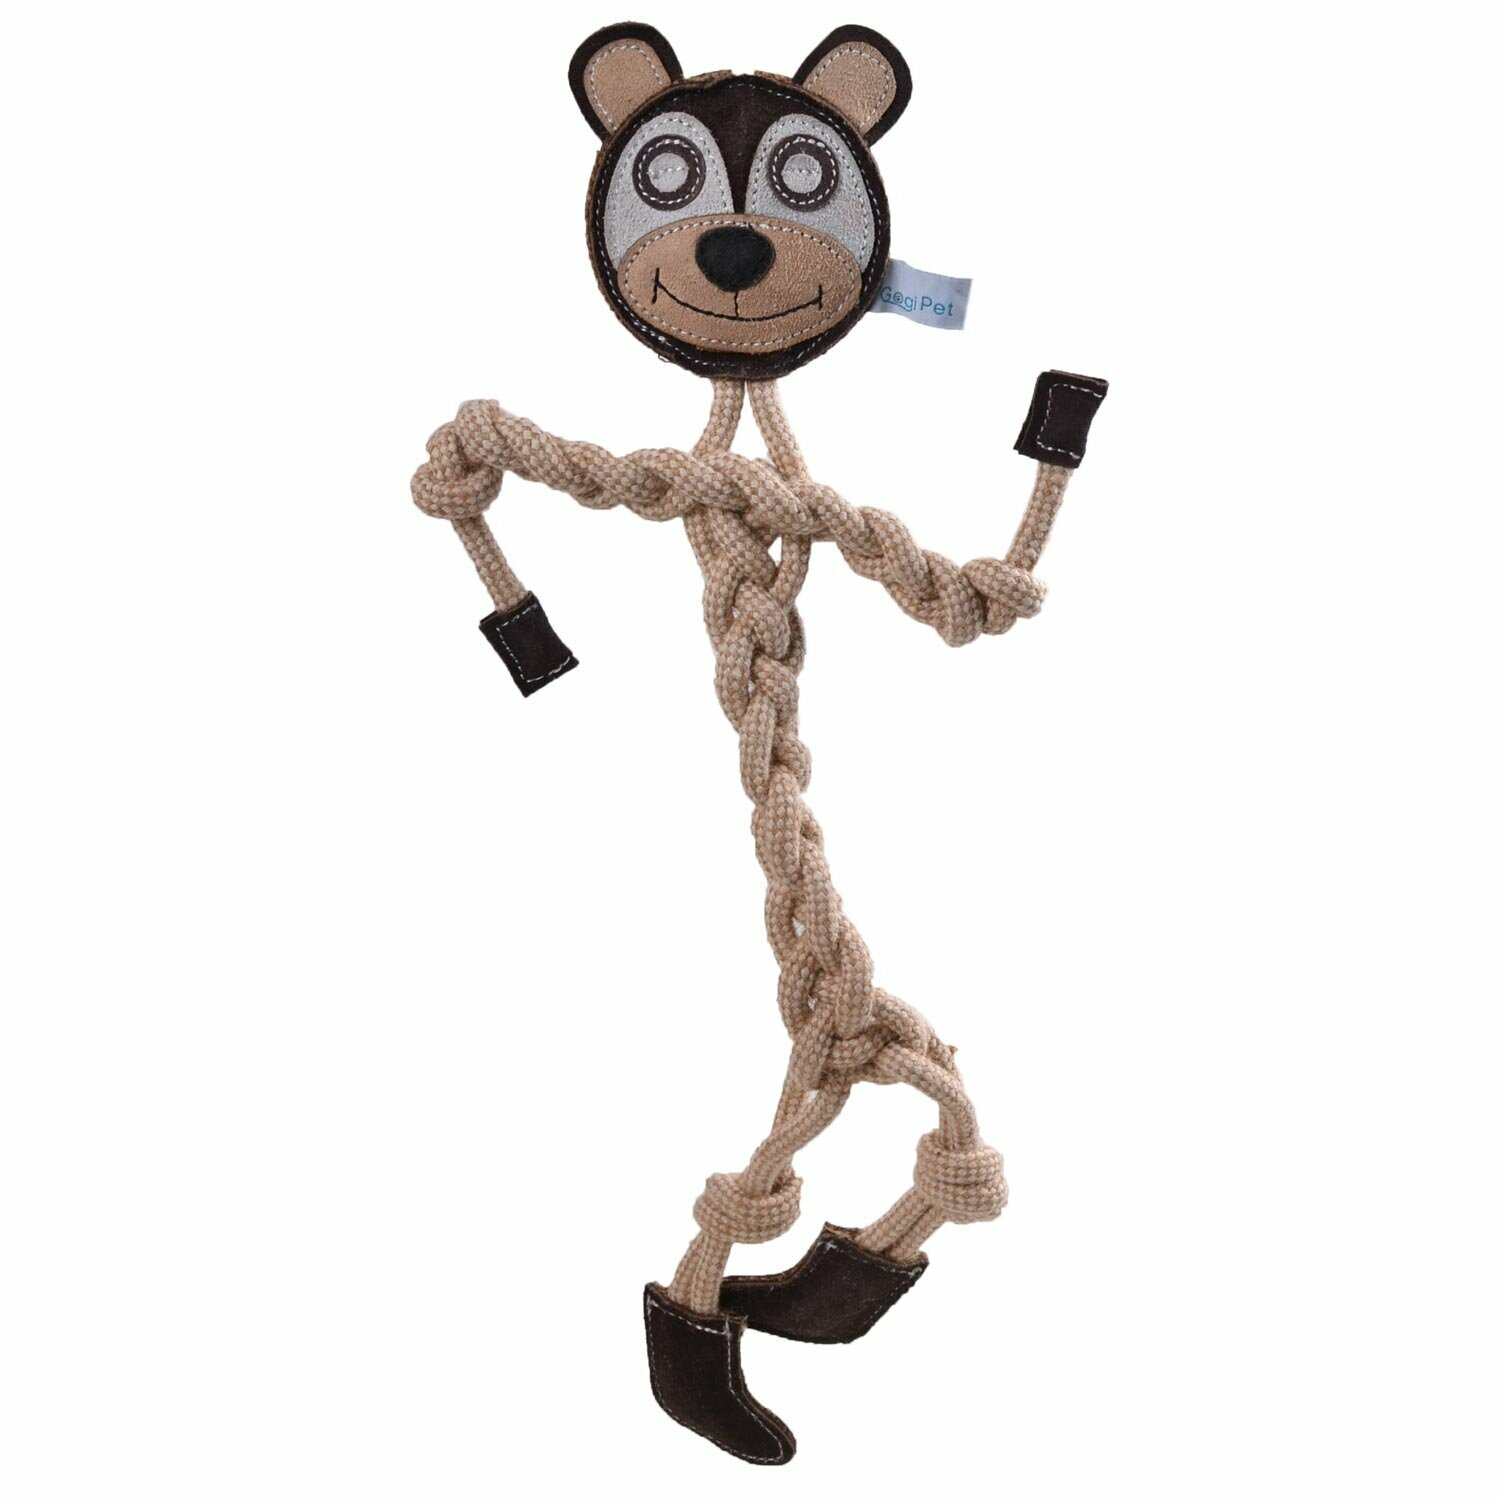 Dog toy teddy bear made from natural, sustainable raw materials from GogiPet ®